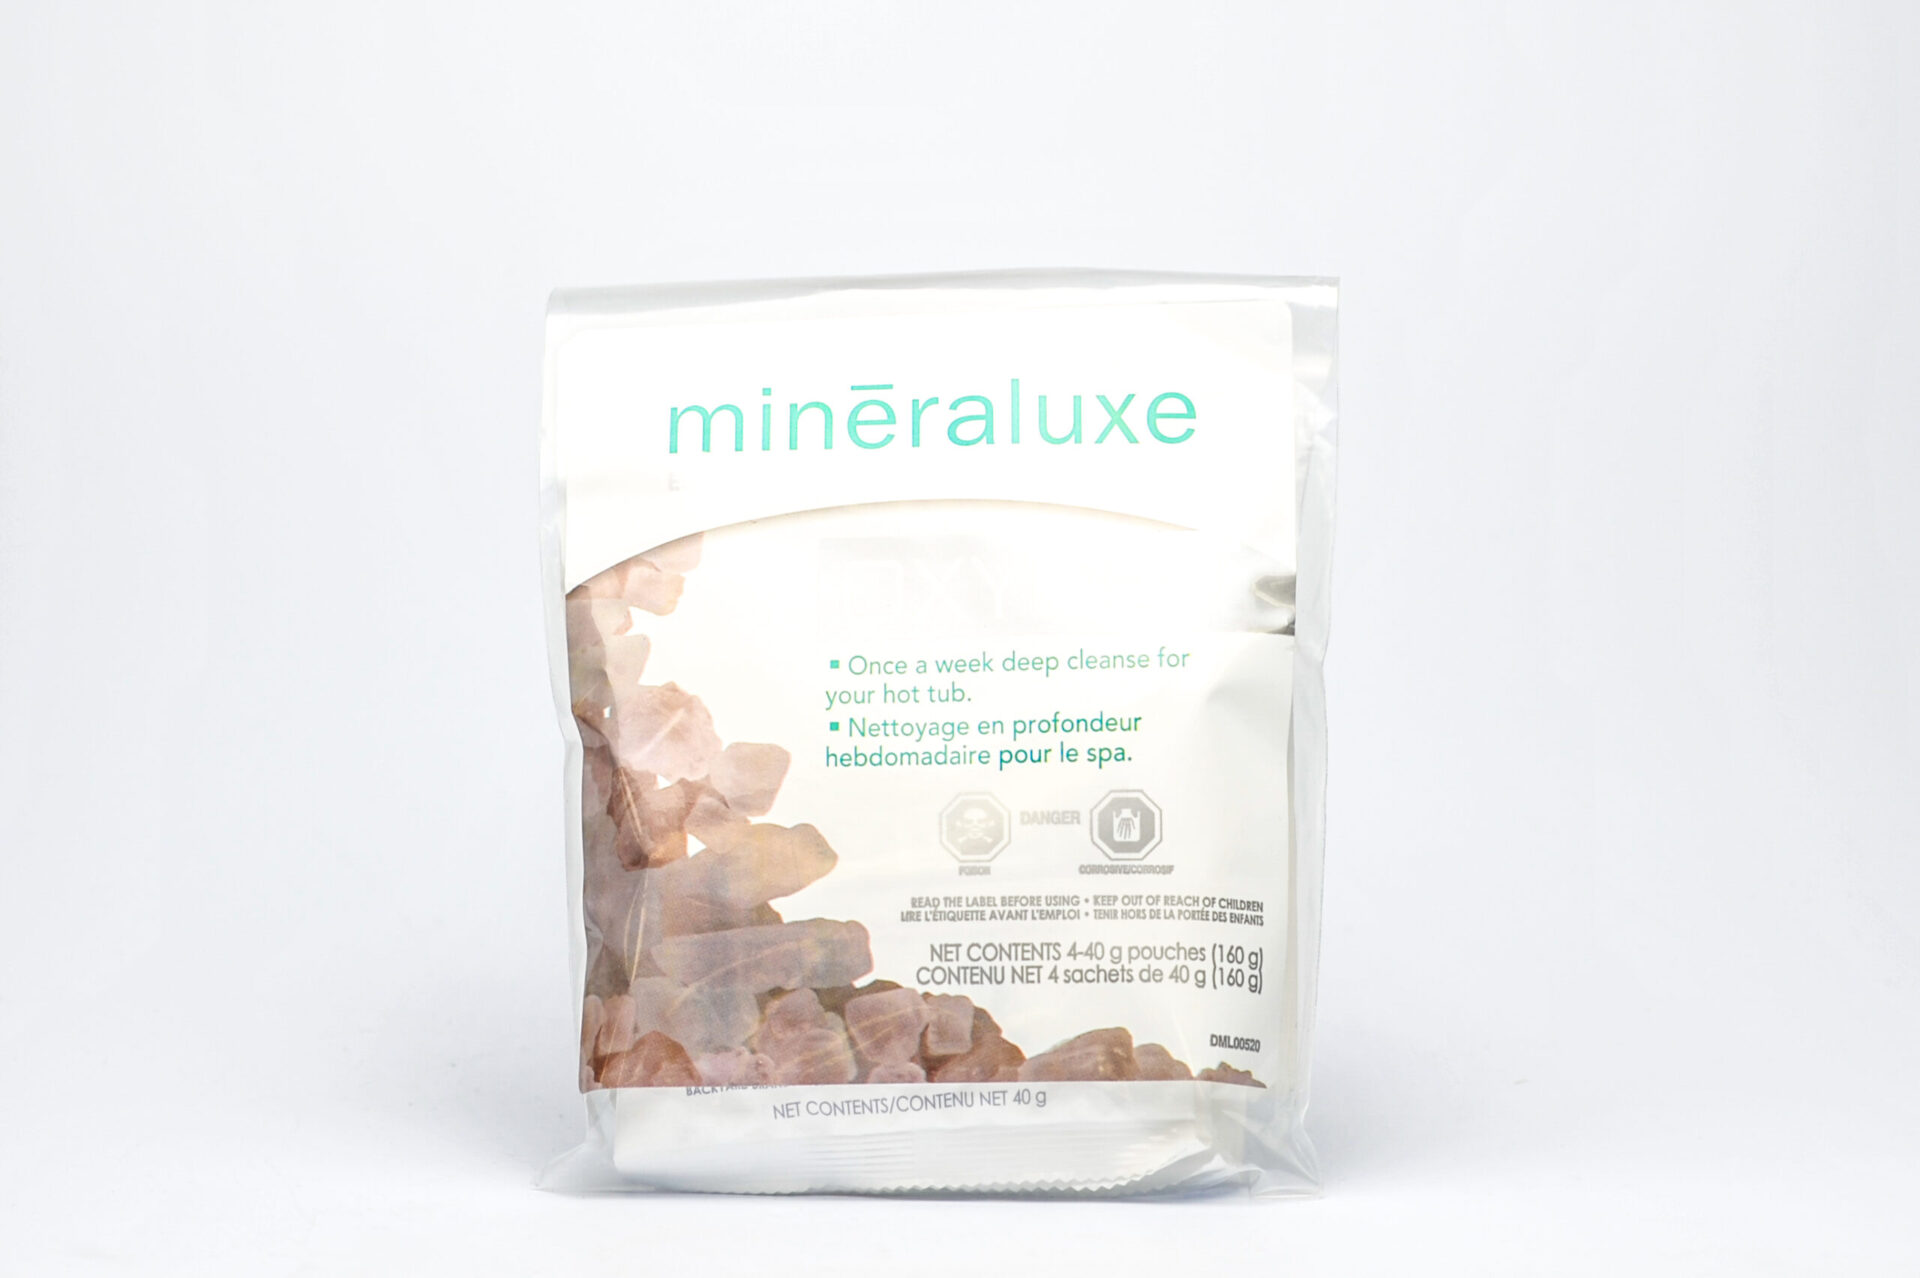 Mineraluxe Oxygen 4x40g scaled - MINERALUXE OXYGEN - 4x40g